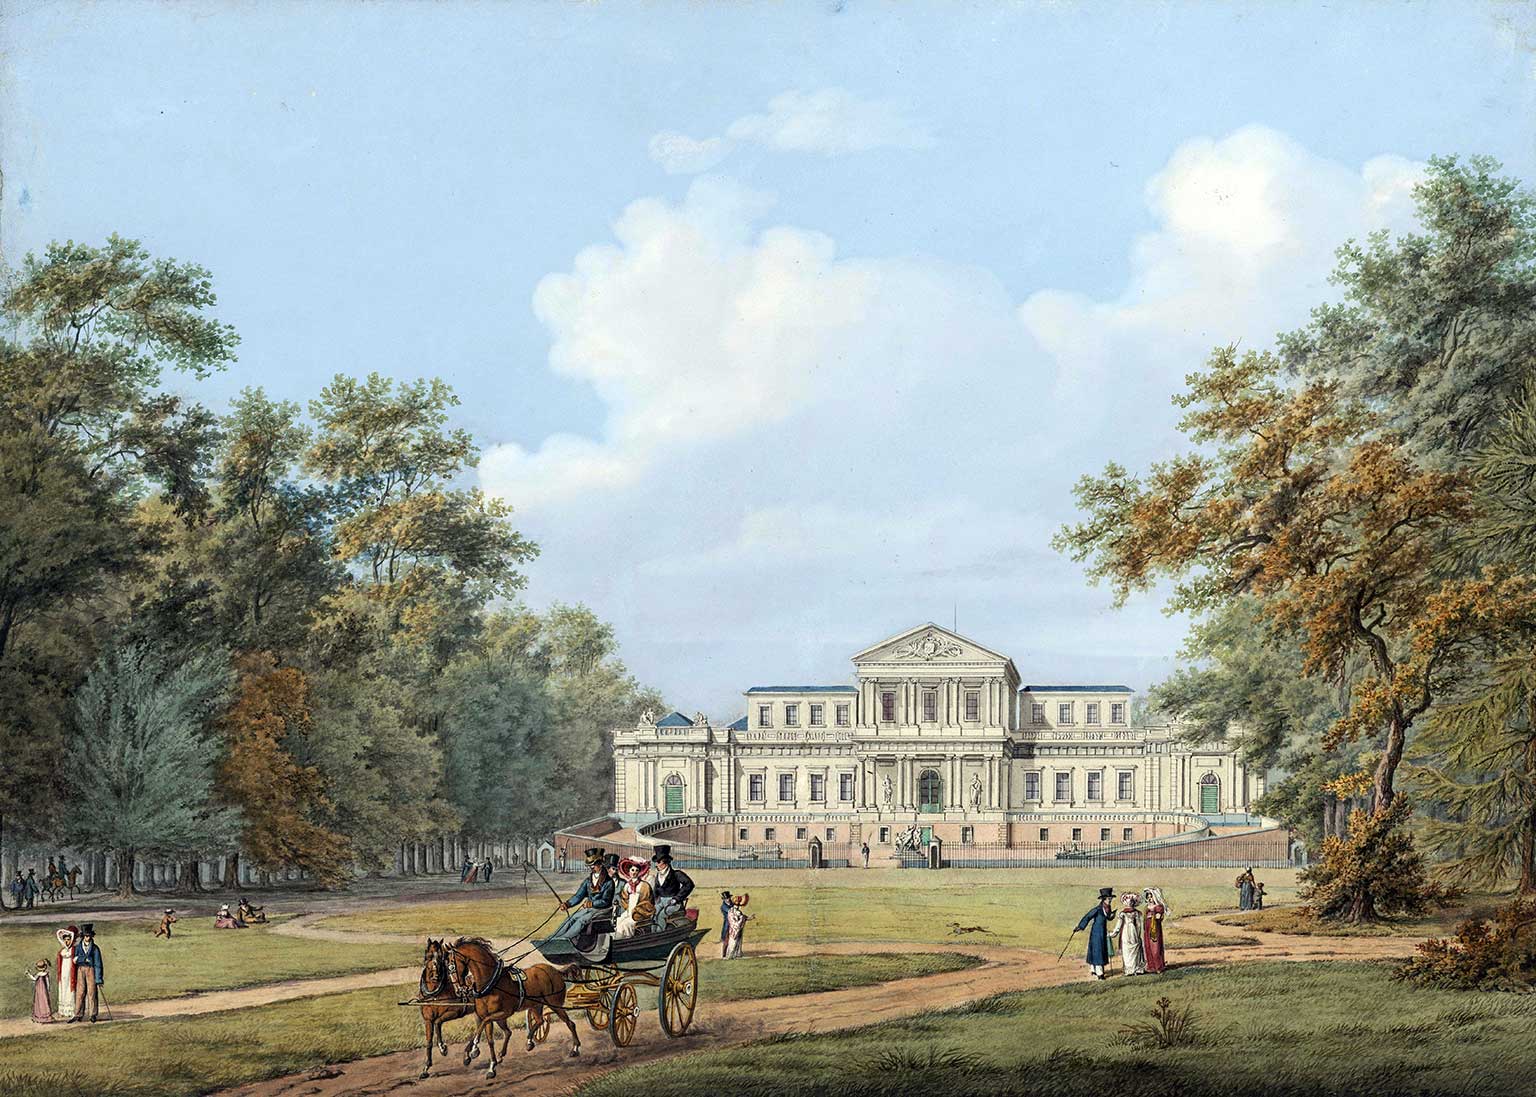 View of the Haarlem Pavilion from the park in 1815, by Frederik Christiaan Bierweiler